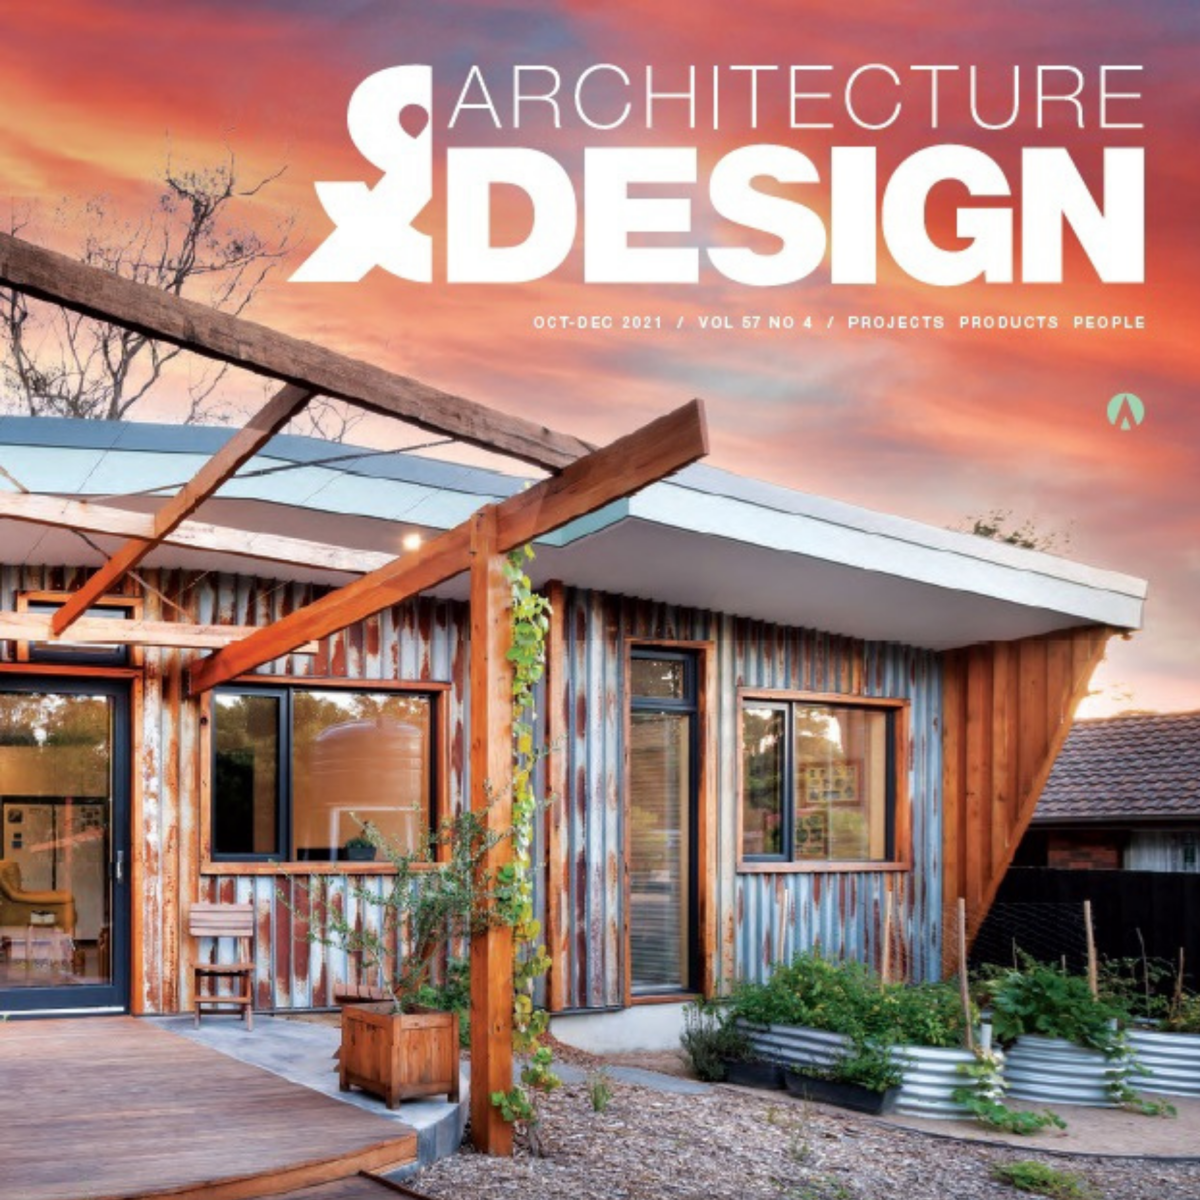 Click to read full article in Architecture & Design: Sustainability Award Winners Issue